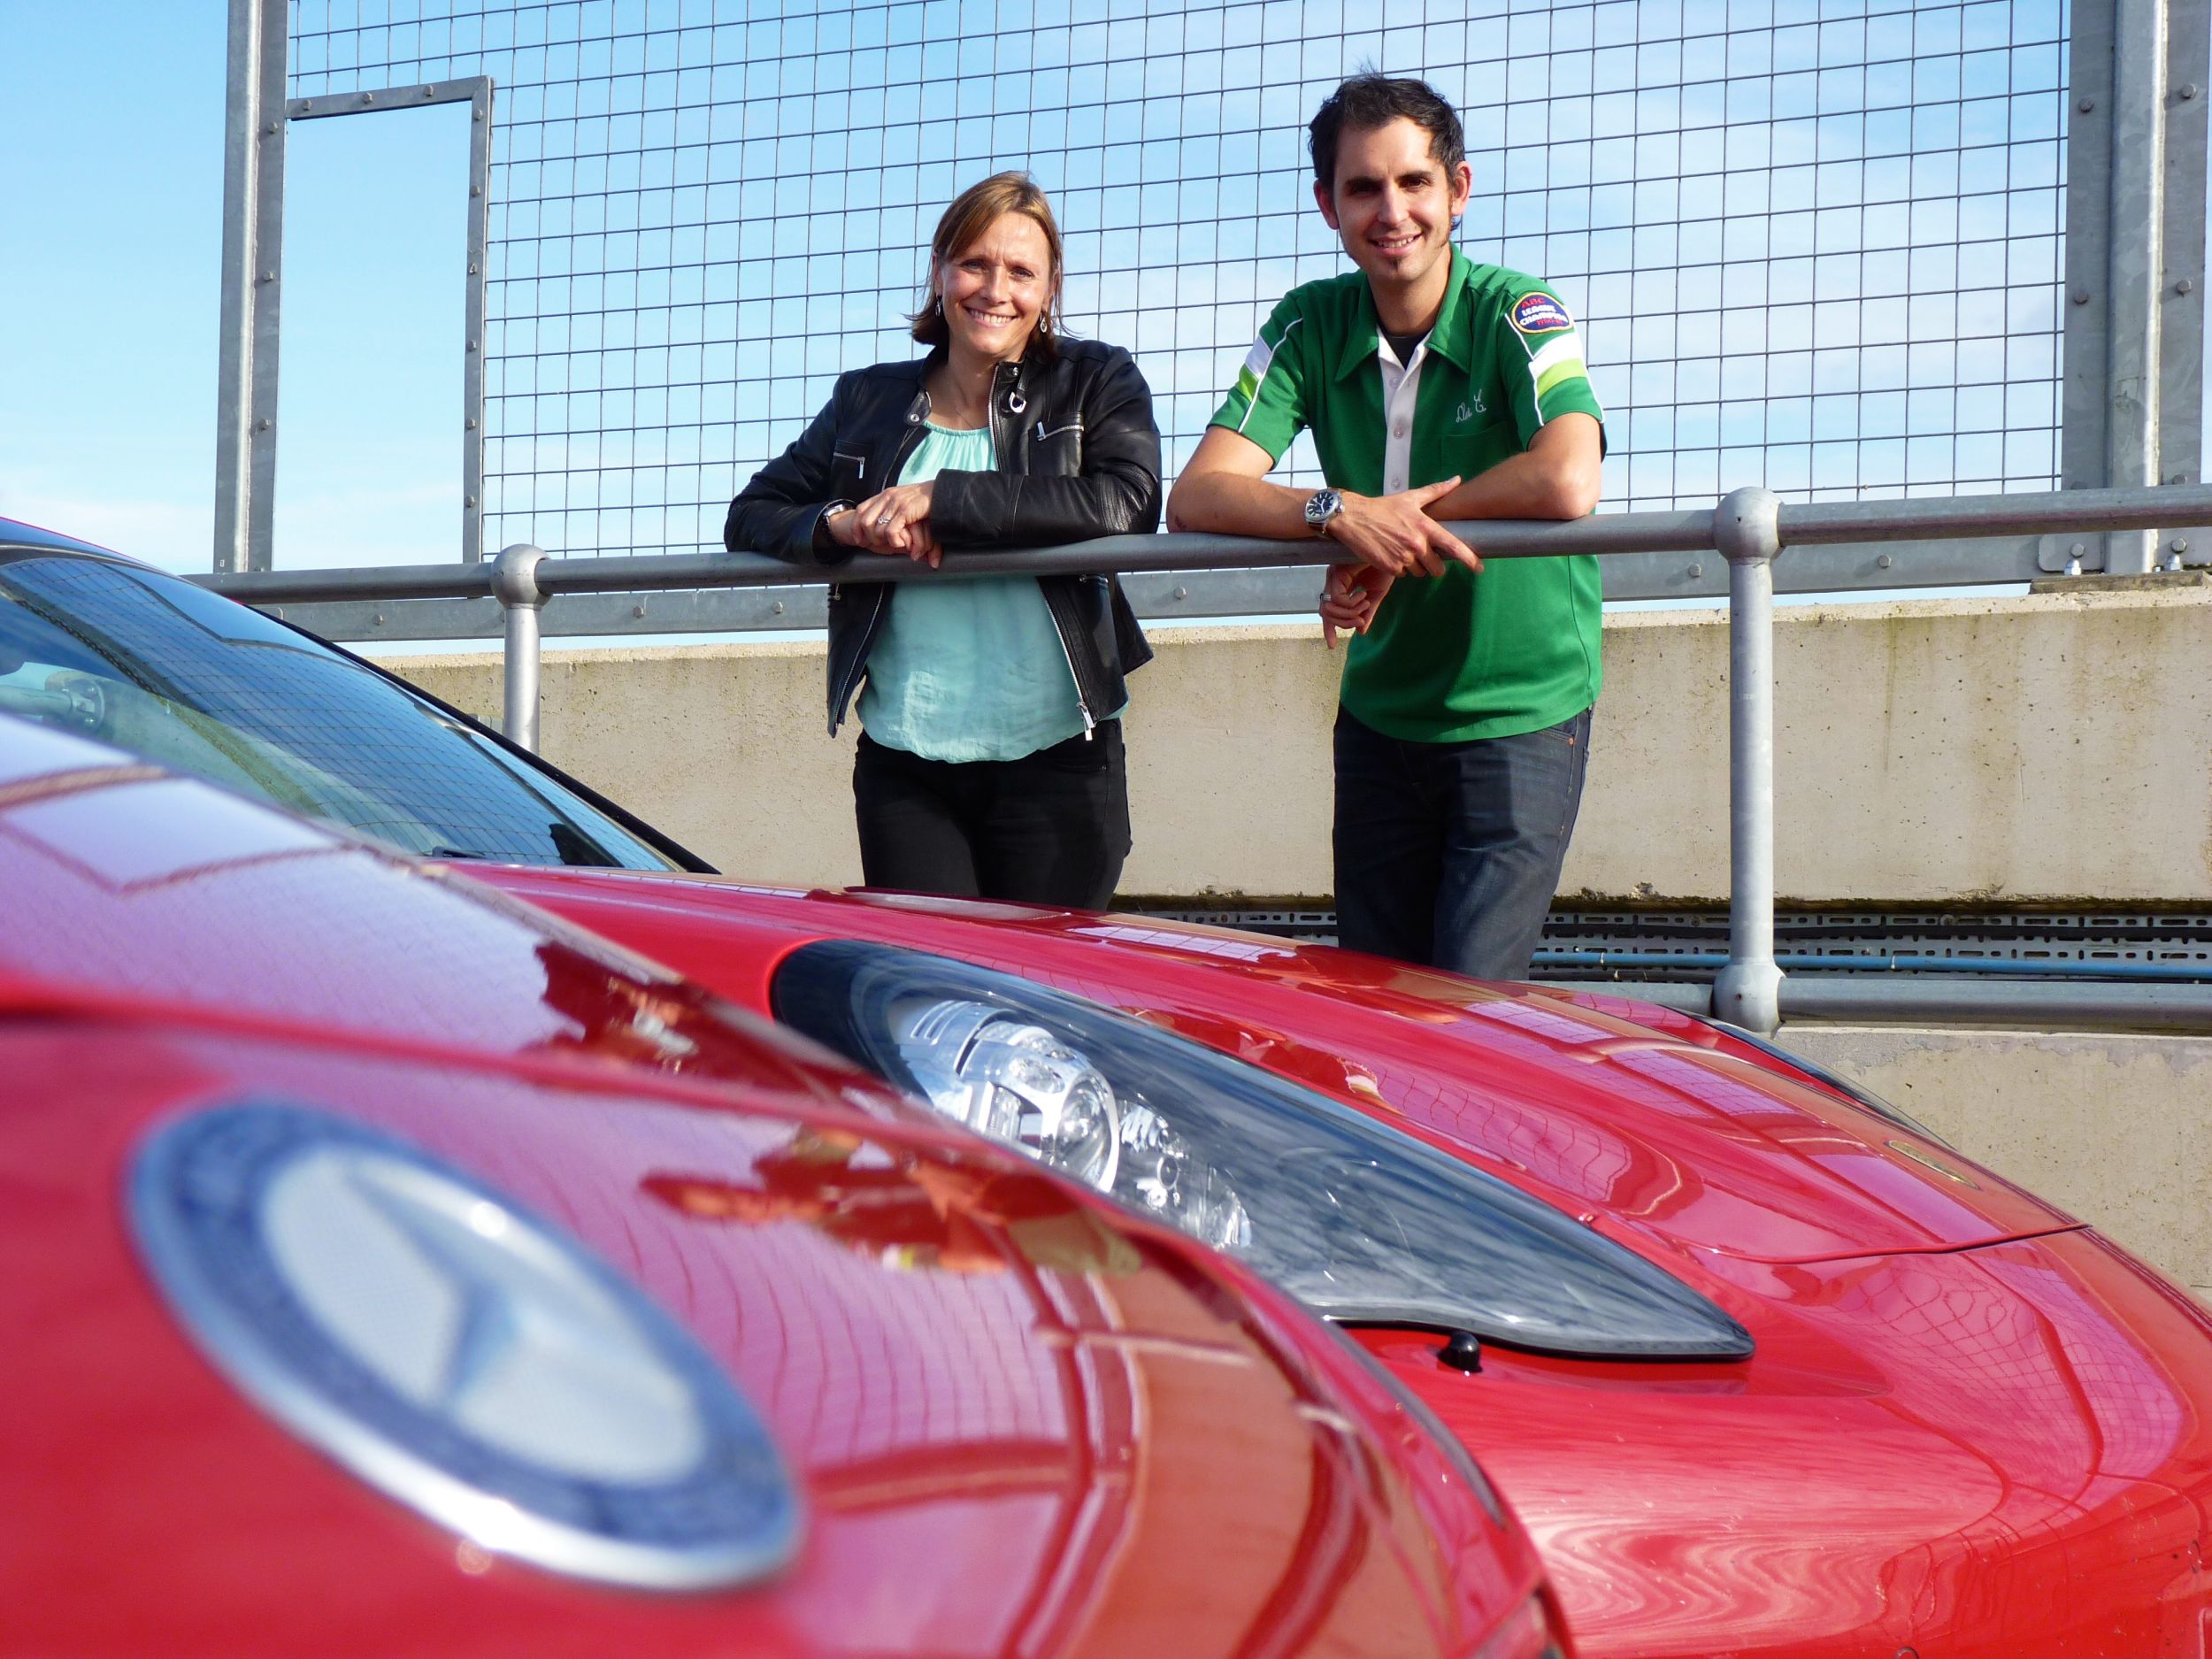 Vicki Butler-Henderson and Sid North by the race track in Fifth Gear Season 21 